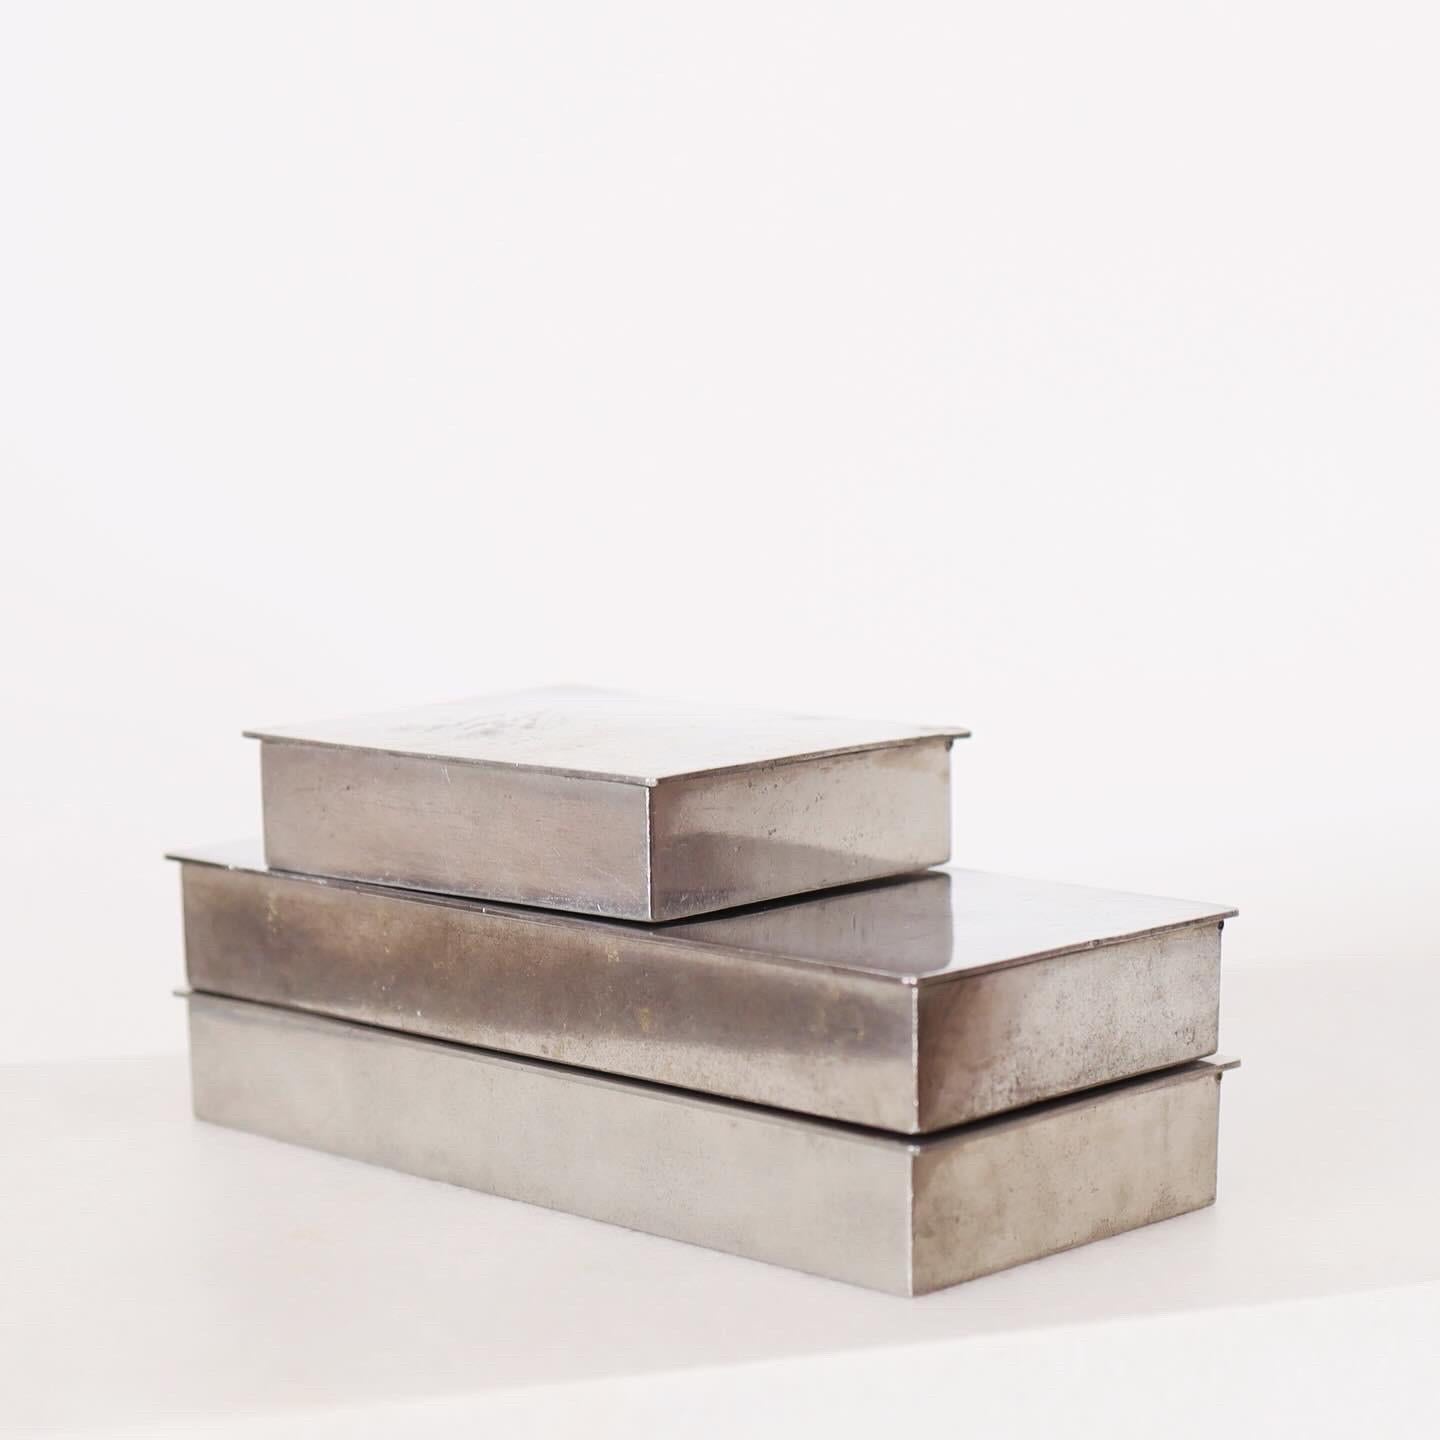 A trio of pewter boxes designed by Arne Erkers for Just Andersen in the 1950s.

* Three (3) lidded boxes in pewter with wooden inner boxes. Originally cigarette boxes.
* Designer: Arne Erkers
* Style: 2494 (2) & 2611 (1)
* Manufacturer: Just